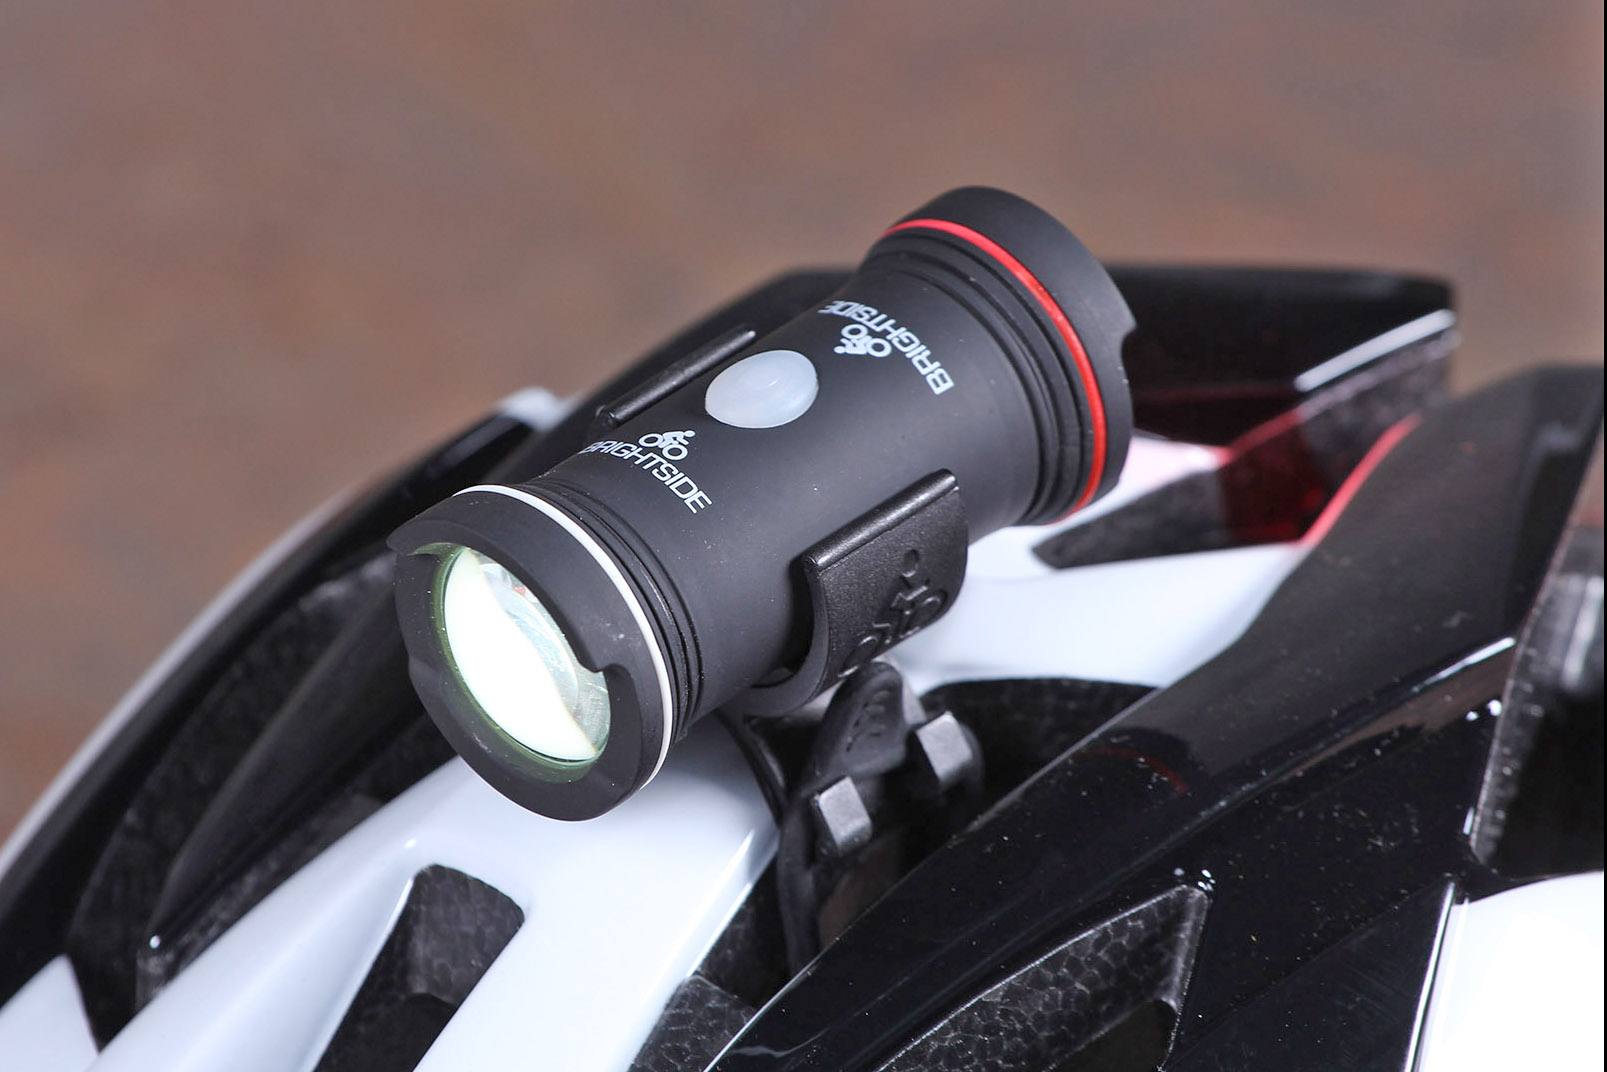 Ideal for All Road Details about   Topside Bike Helmet Light Dual Front & Rear Bright Light 